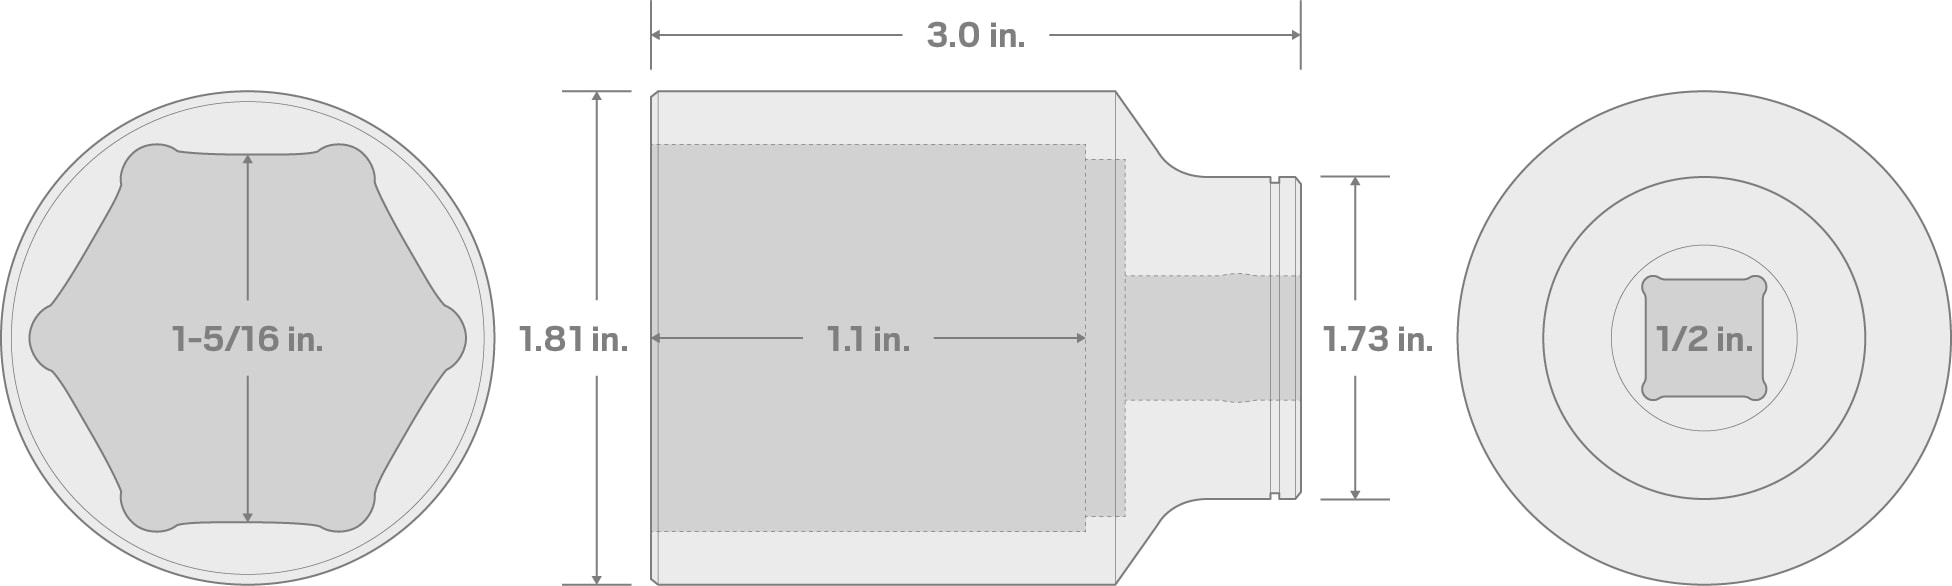 Specs for 1/2 Inch Drive x 1-5/16 Inch Deep 6-Point Socket